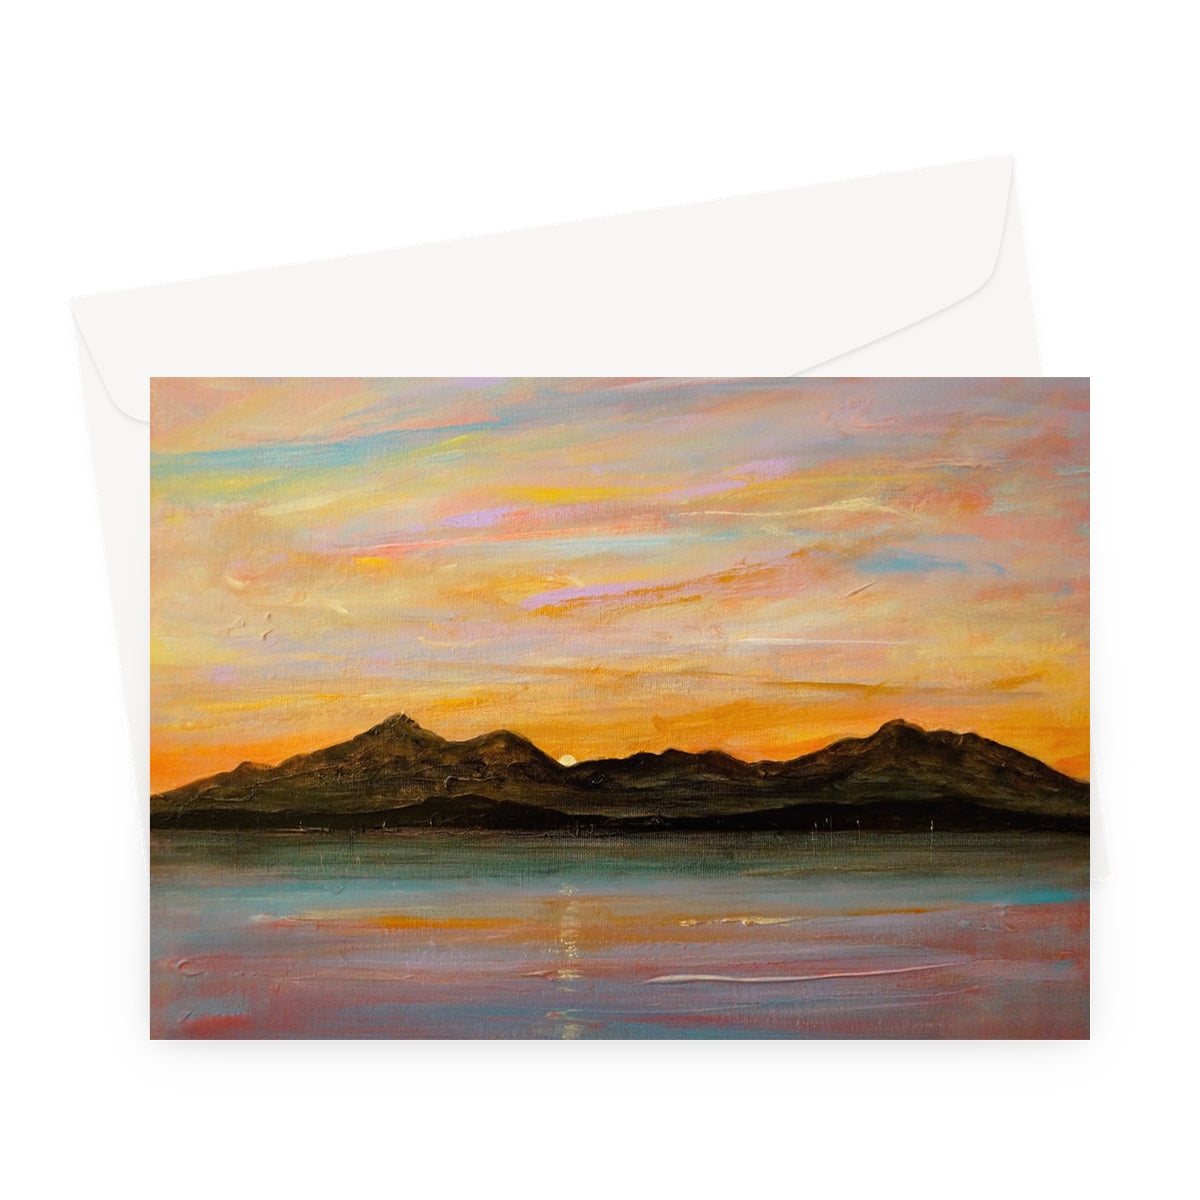 The Sleeping Warrior Arran Art Gifts Greeting Card-Greetings Cards-Arran Art Gallery-A5 Landscape-10 Cards-Paintings, Prints, Homeware, Art Gifts From Scotland By Scottish Artist Kevin Hunter